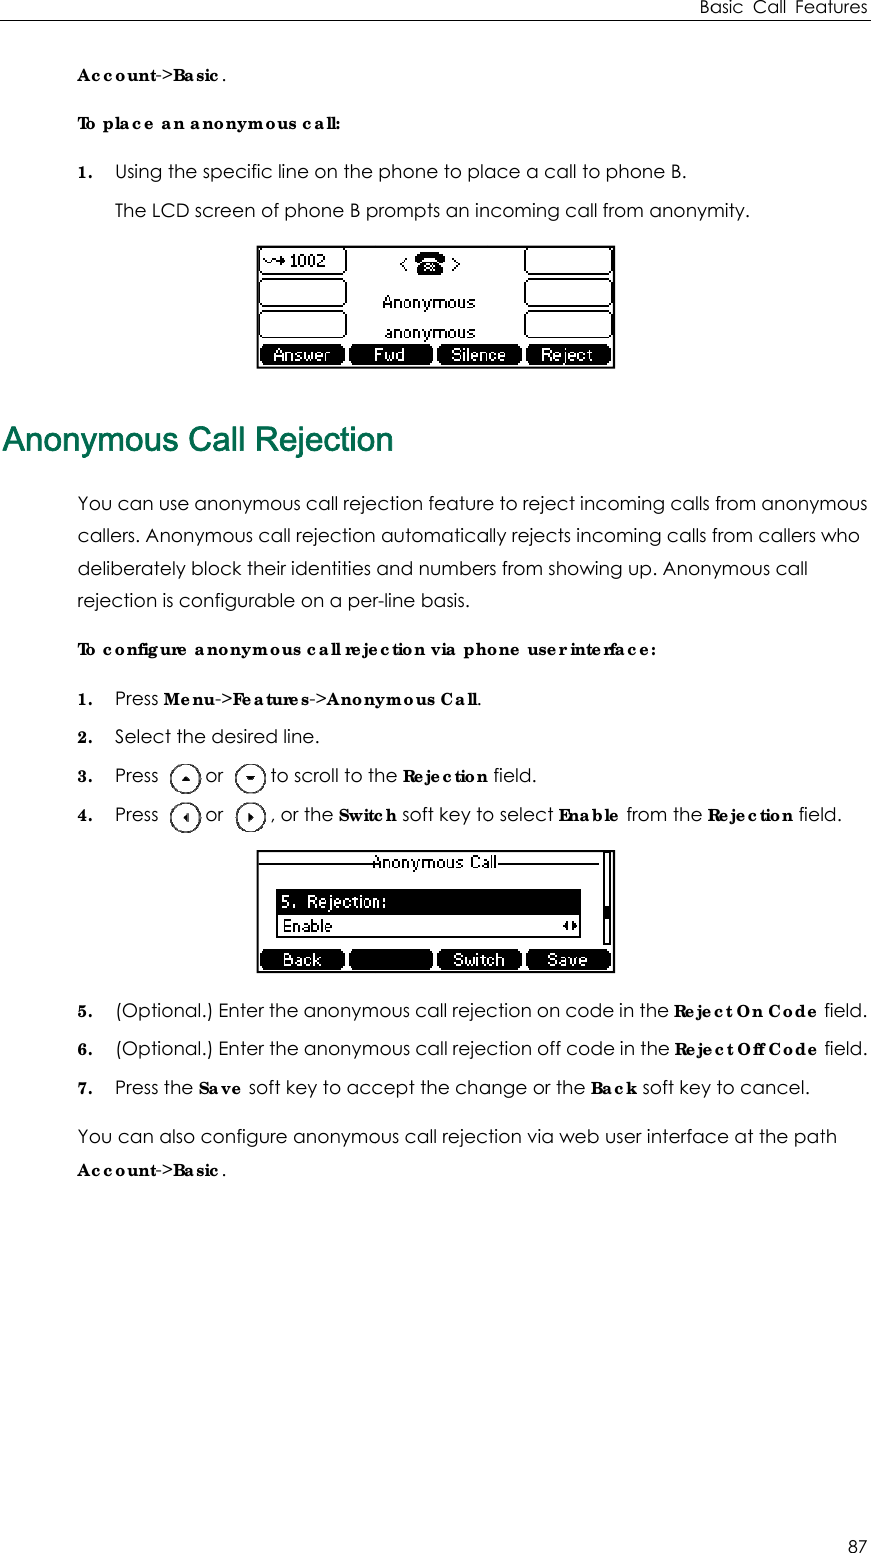 AnAccountTo place1. UsingThe nonymouYou cancallers. AdeliberarejectionTo config1. Pres2. Sele3. Pres4. Pres5. (Op6. (Op7. PresYou canAccountt-&gt;Basic. e an anonymg the specificLCD screen ous Call Rn use anonymAnonymous cately block thn is configuragure anonyms Menu-&gt;Feaect the desires     or     s     or     tional.) Entertional.) Enters the Save son also configut-&gt;Basic.  mous call: c line on the of phone B pRejectiomous call rejecall rejectionheir identities able on a permous call rejeatures-&gt;Anoned line.  to scroll to t , or the Switcr the anonymr the anonymoft key to accure anonymo phone to plaprompts an inn ection feature automatica and numberr-line basis. ection via phymous Call. he Rejectionch soft key tomous call rejecmous call rejecept the chaous call rejecace a call toncoming call e to reject incally rejects incrs from showione user inte field. o select Enabction on codction off codange or the Bction via web Bao phone B.  from anonym coming calls coming calls ng up. Anonerface: ble from the R de in the Rejede in the RejeBack soft key  user interfacasic Call Feamity.  from anonymfrom callers wymous call Rejection fielect On Code ect Off Code  to cancel. ce at the patatures 87 mous who d.  field.  field. th 